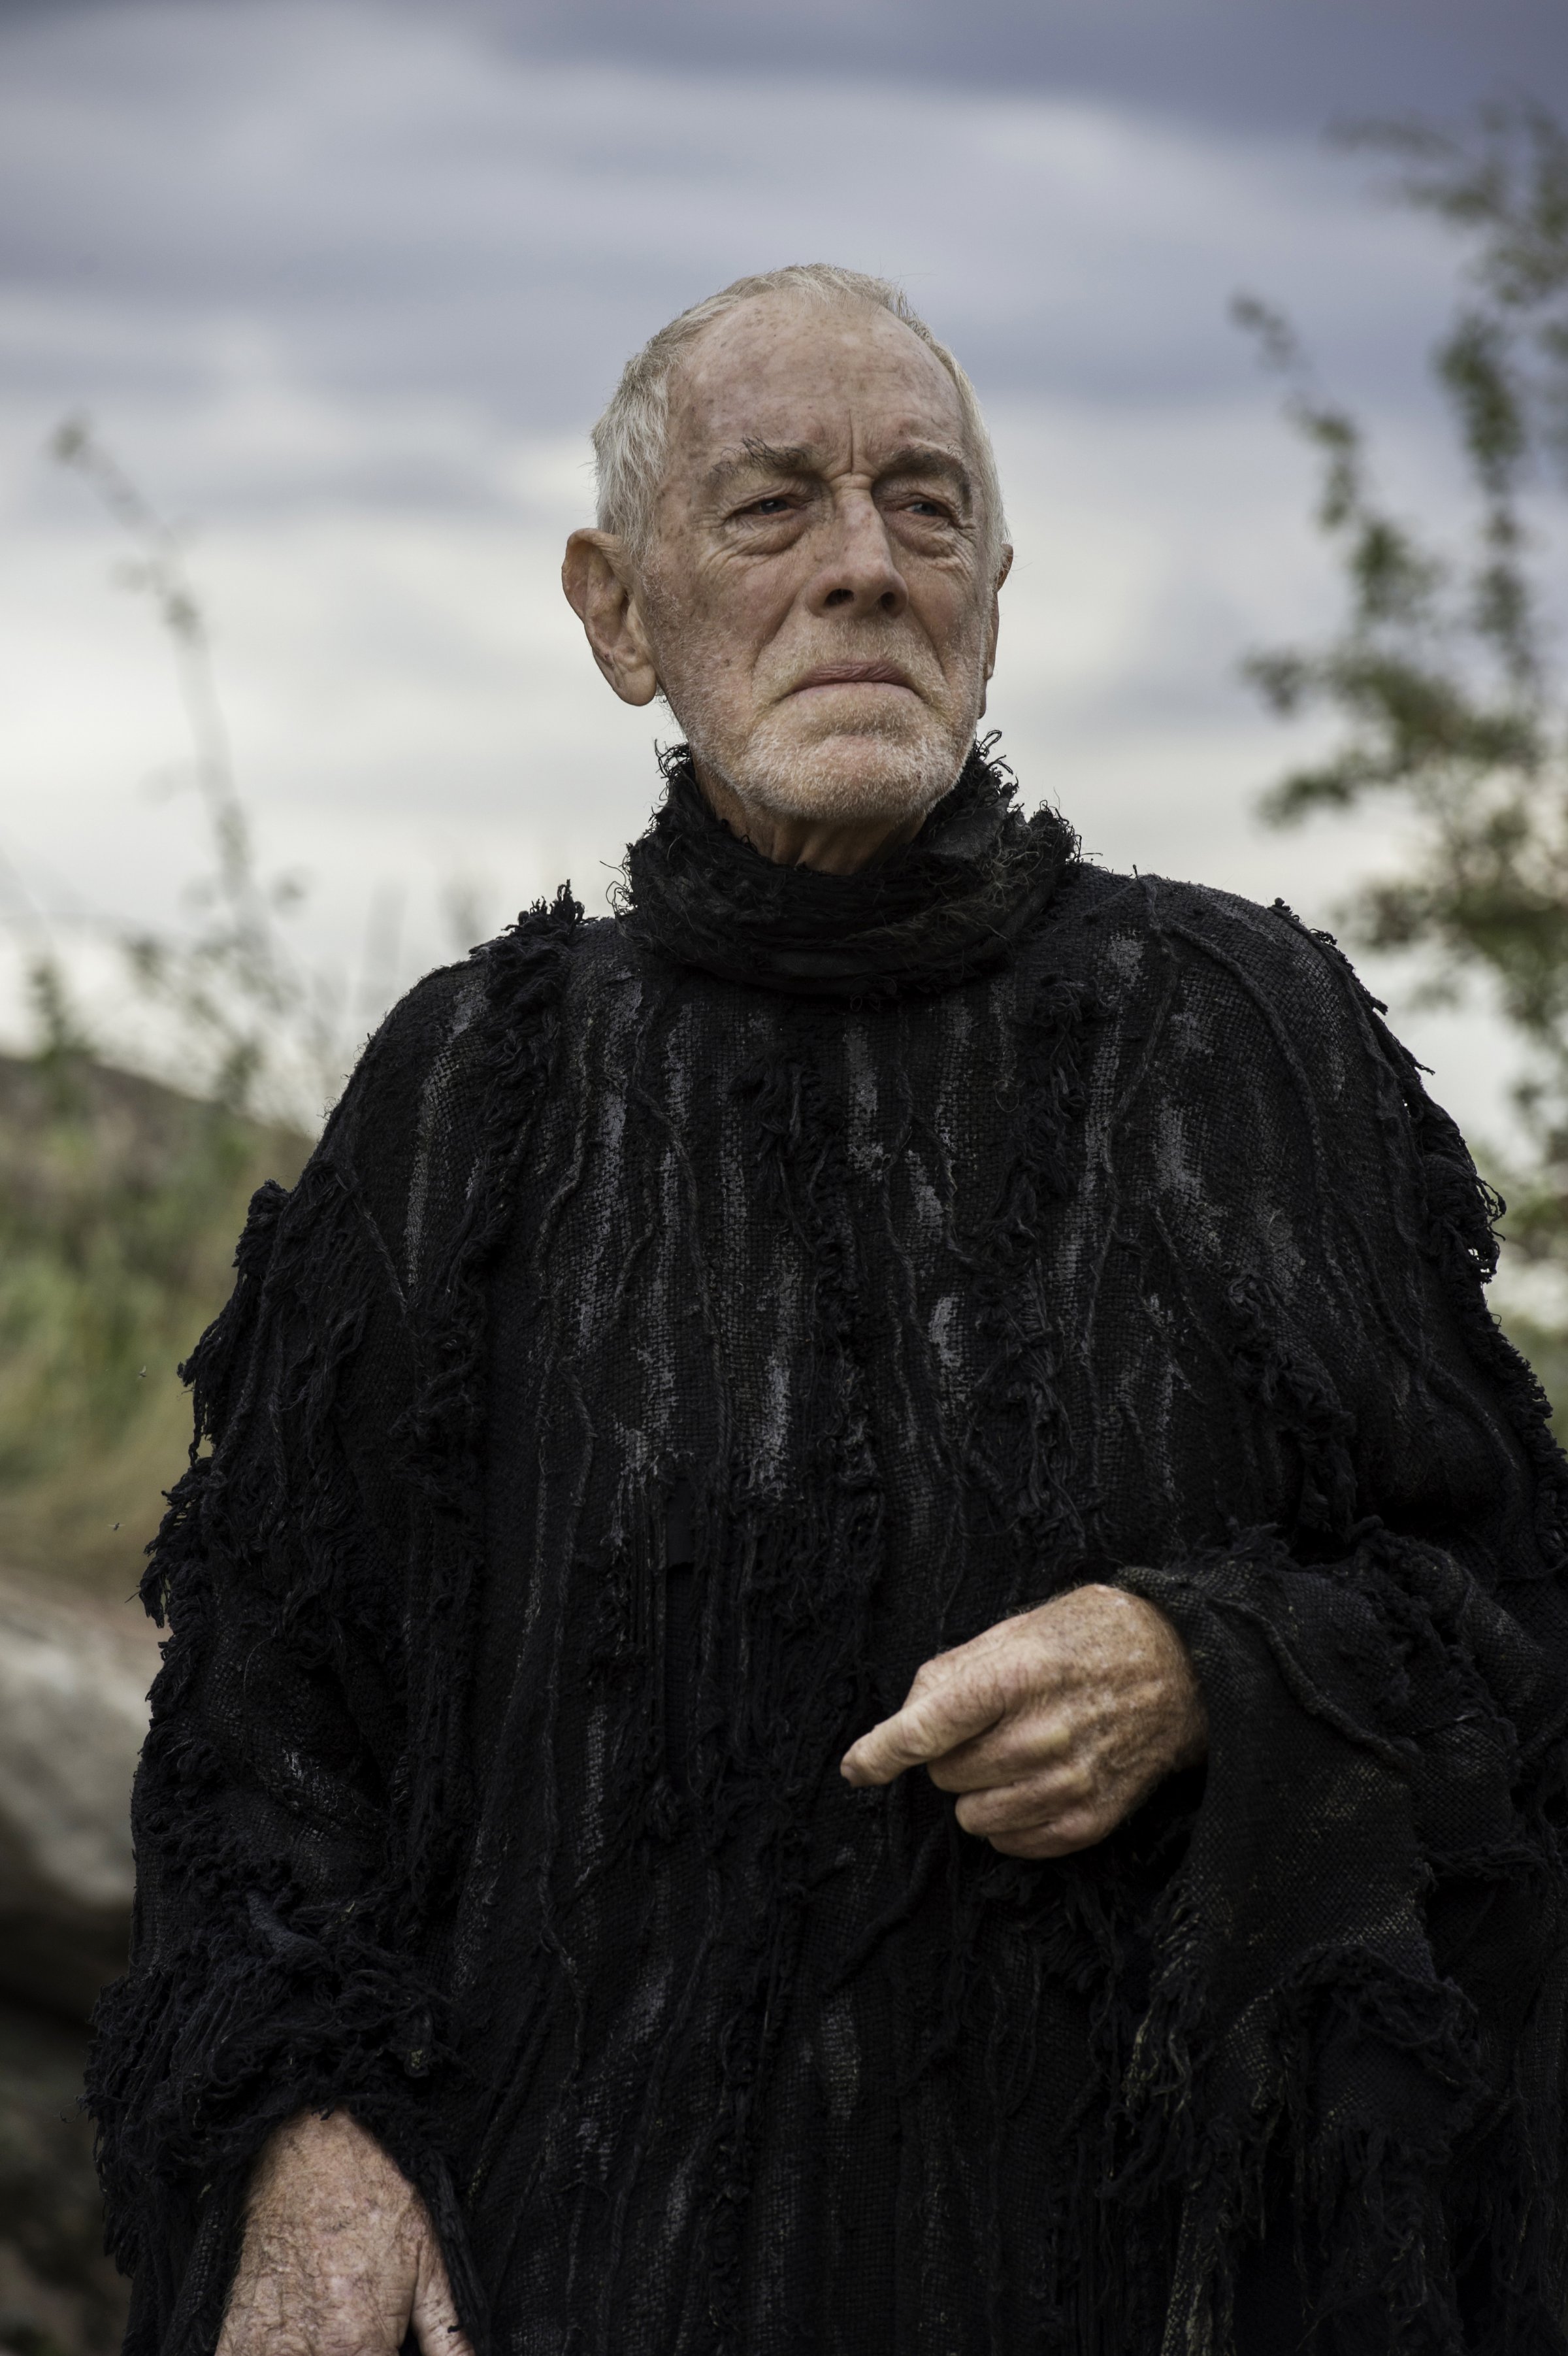 Max von Sydow as the Three-Eyed Raven in Game of Thrones